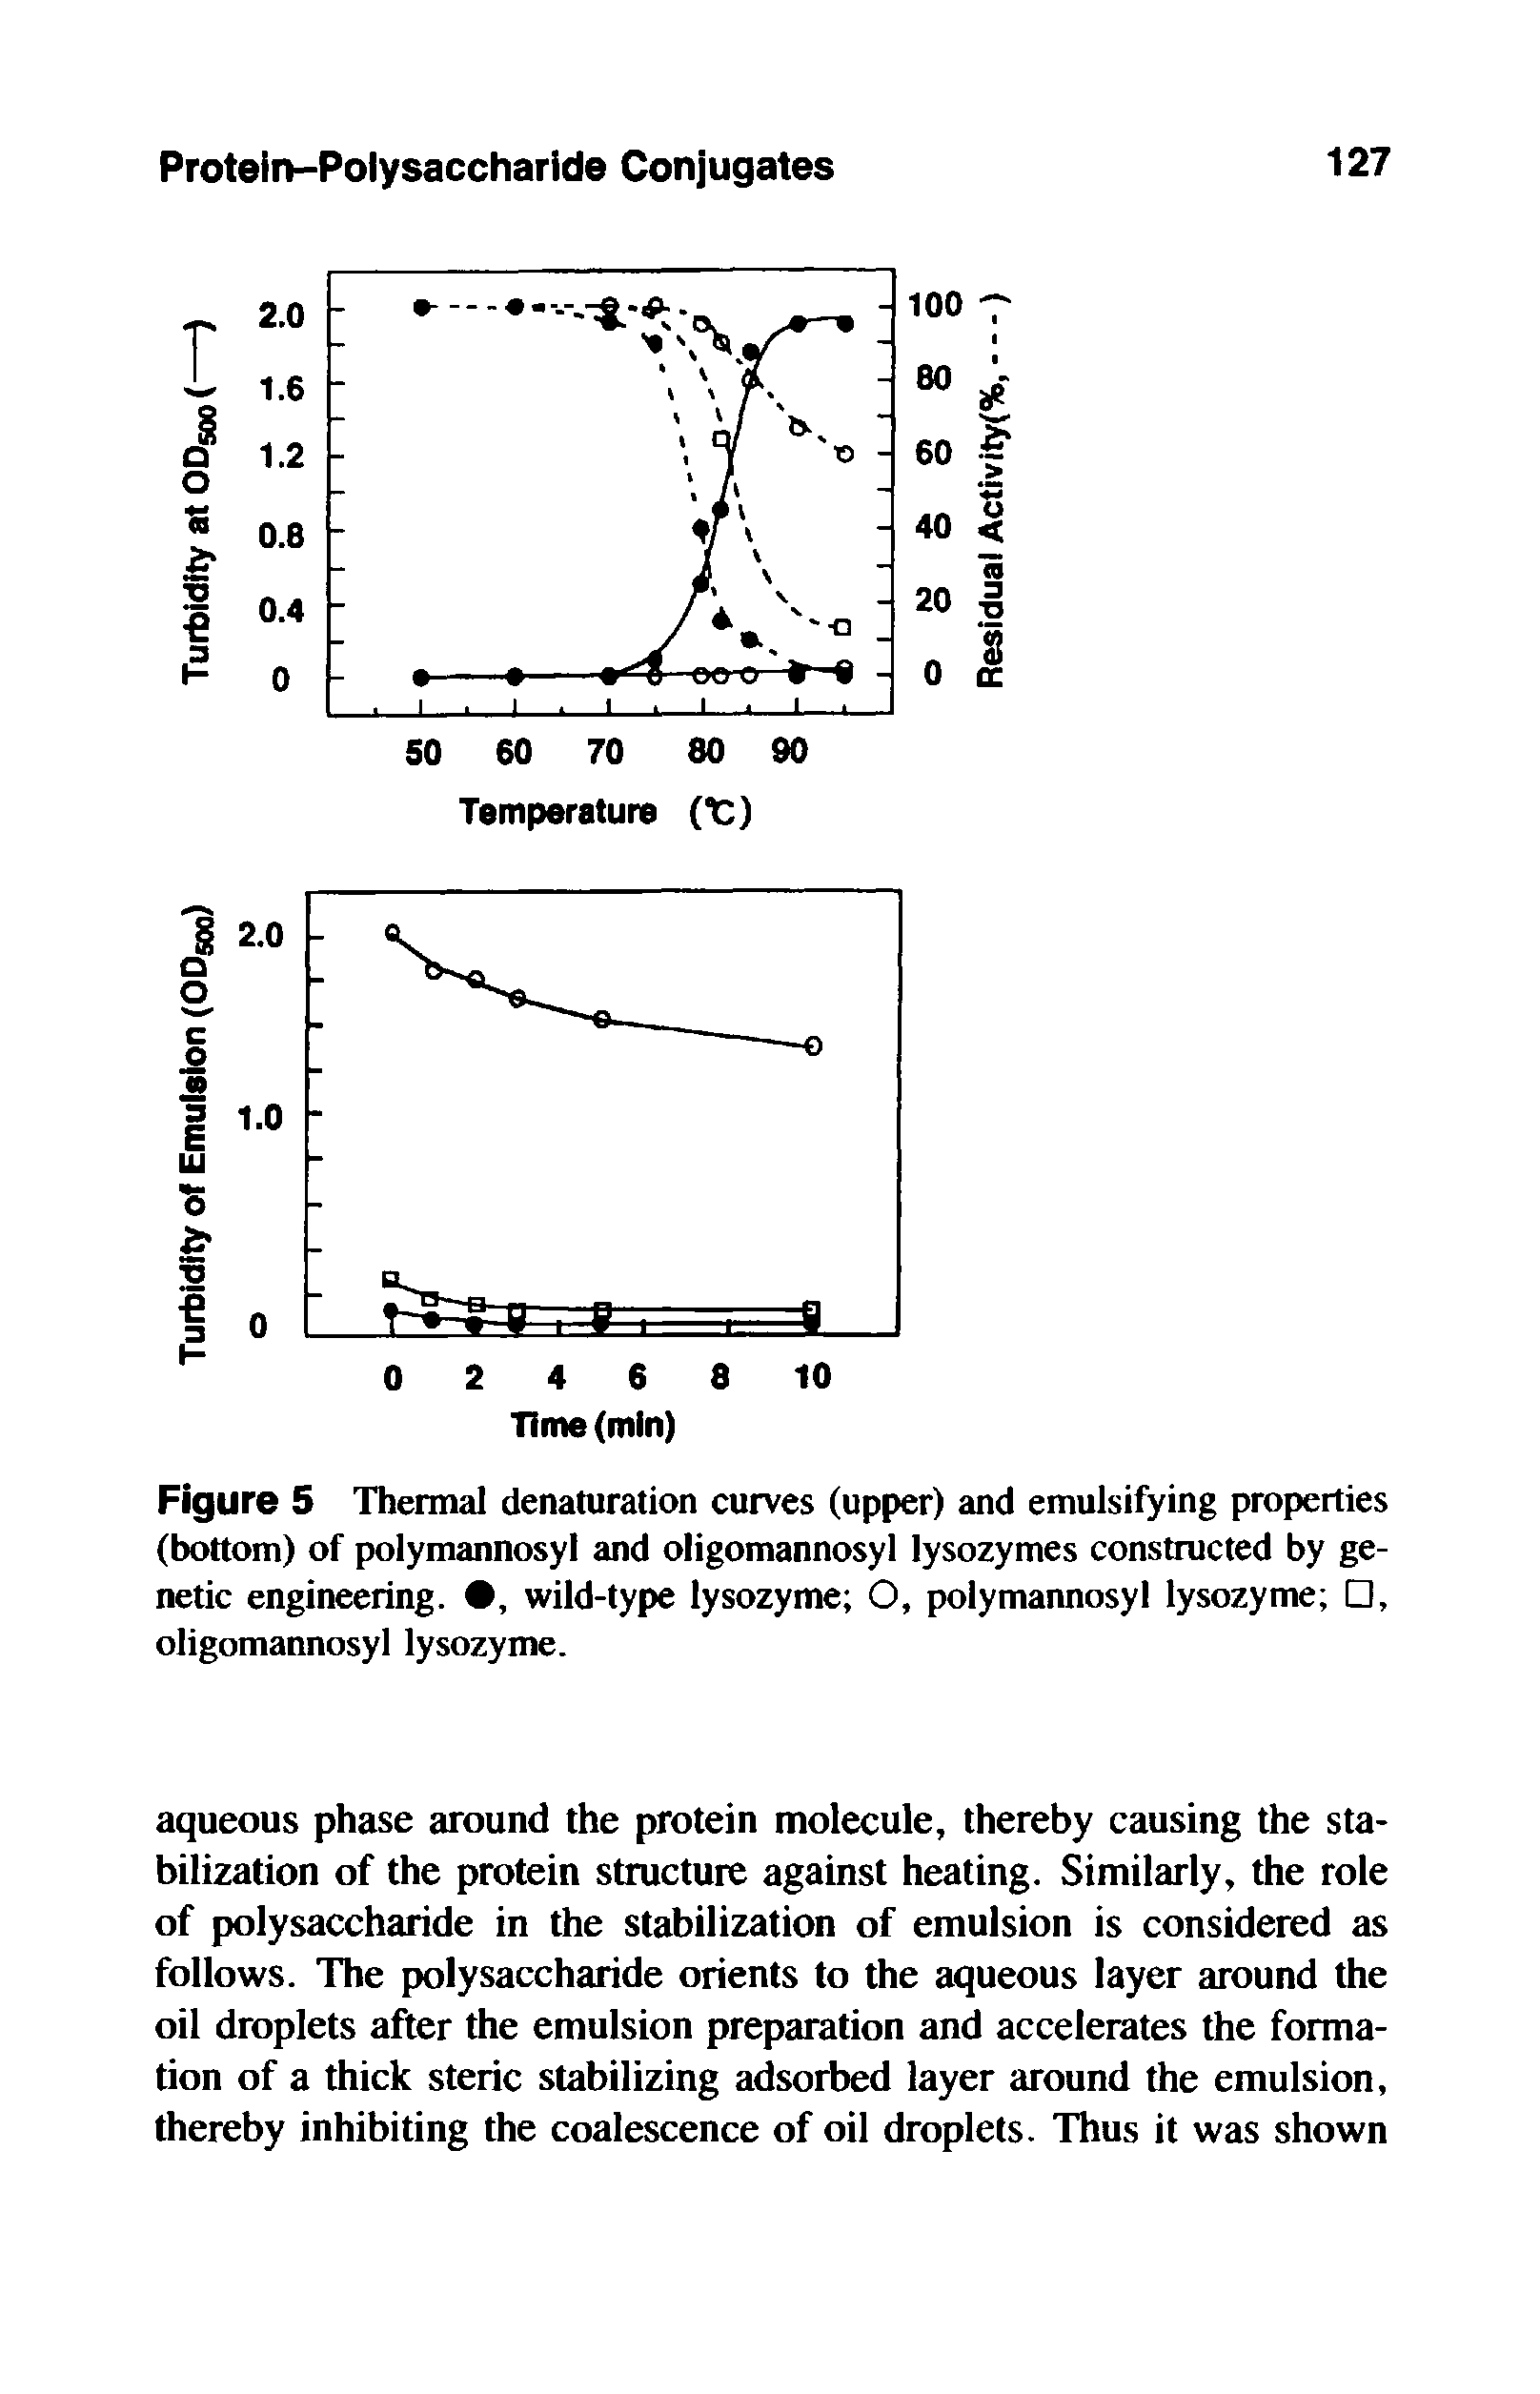 Figure 5 Thermal denaturation curves (upper) and emulsifying properties (bottom) of polymannosyl and oligomannosyl lysozymes constructed by genetic engineering. , wild-type lysozyme O, polymannosyl lysozyme , oligomannosyl lysozyme.